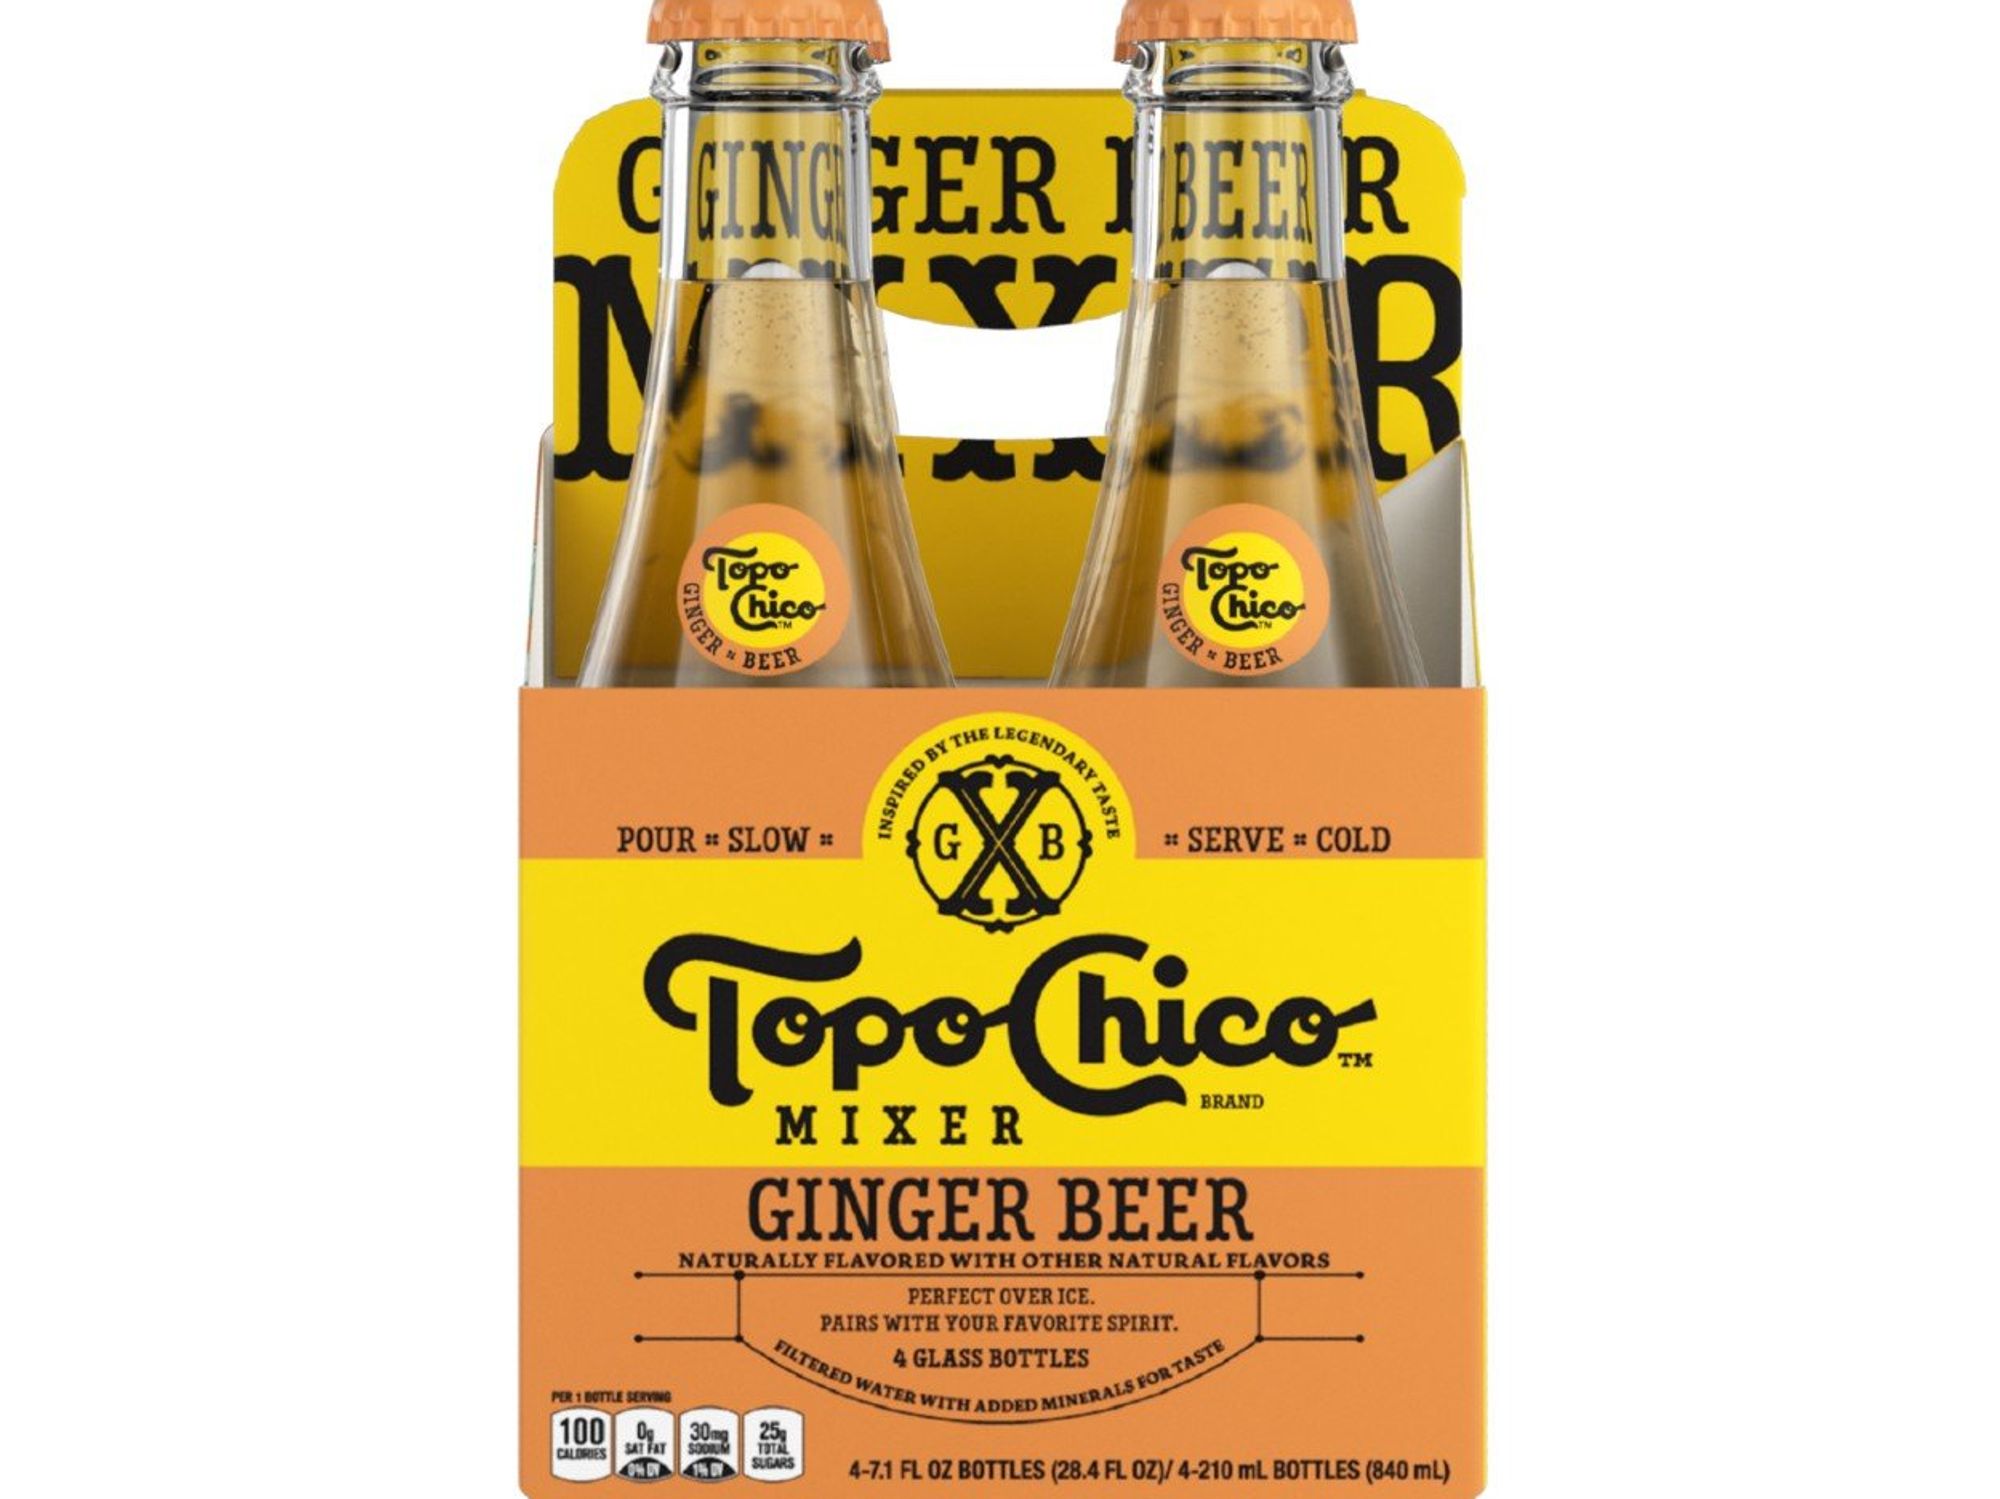 Topo Chico ginger beer